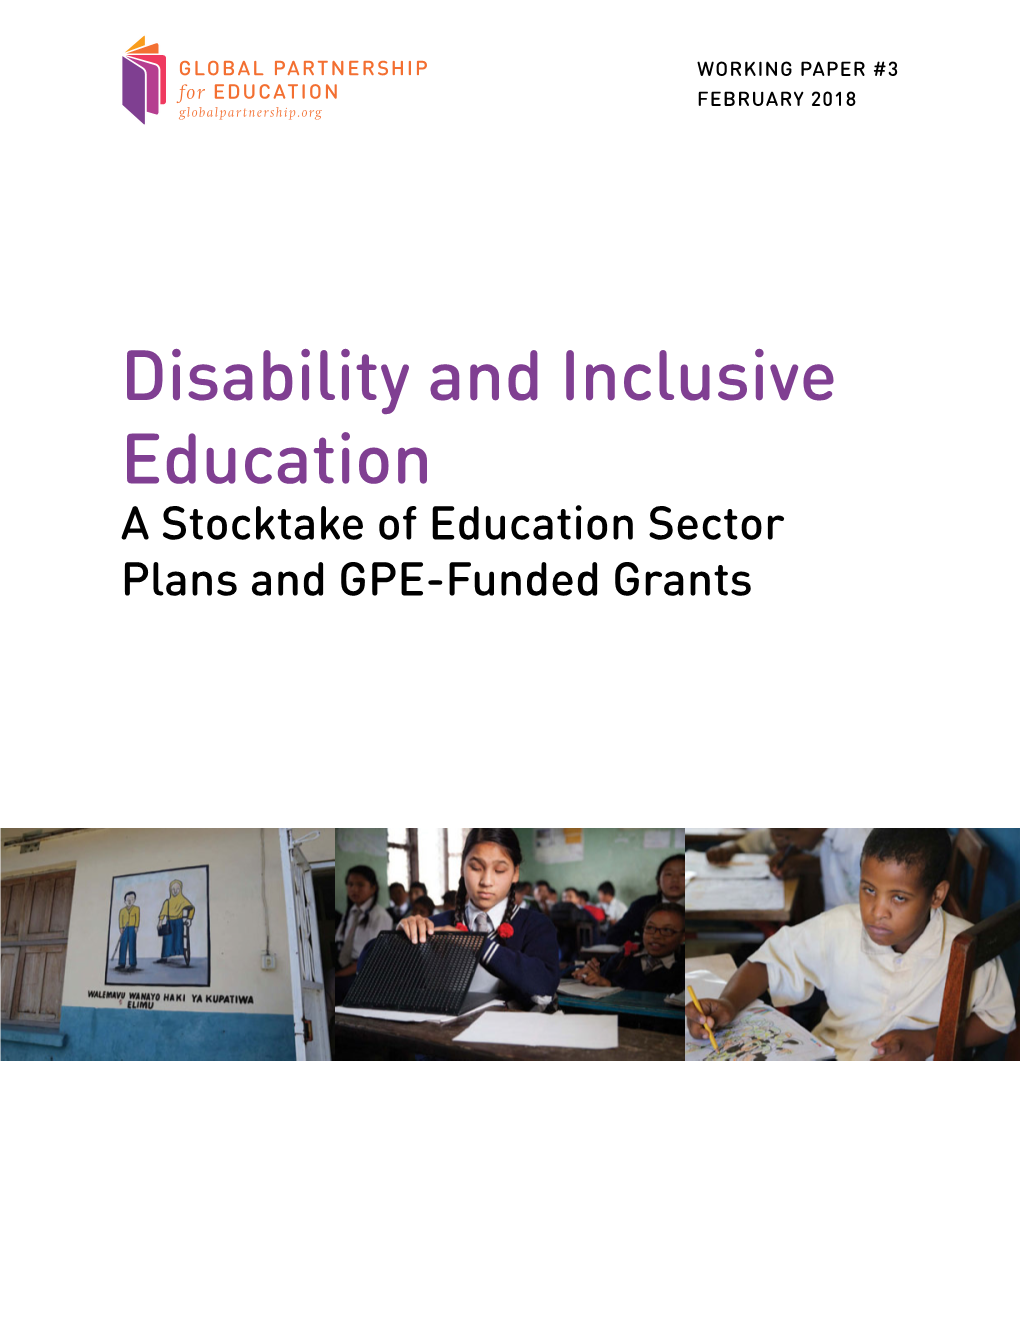 Disability and Inclusive Education a Stocktake of Education Sector Plans and GPE-Funded Grants